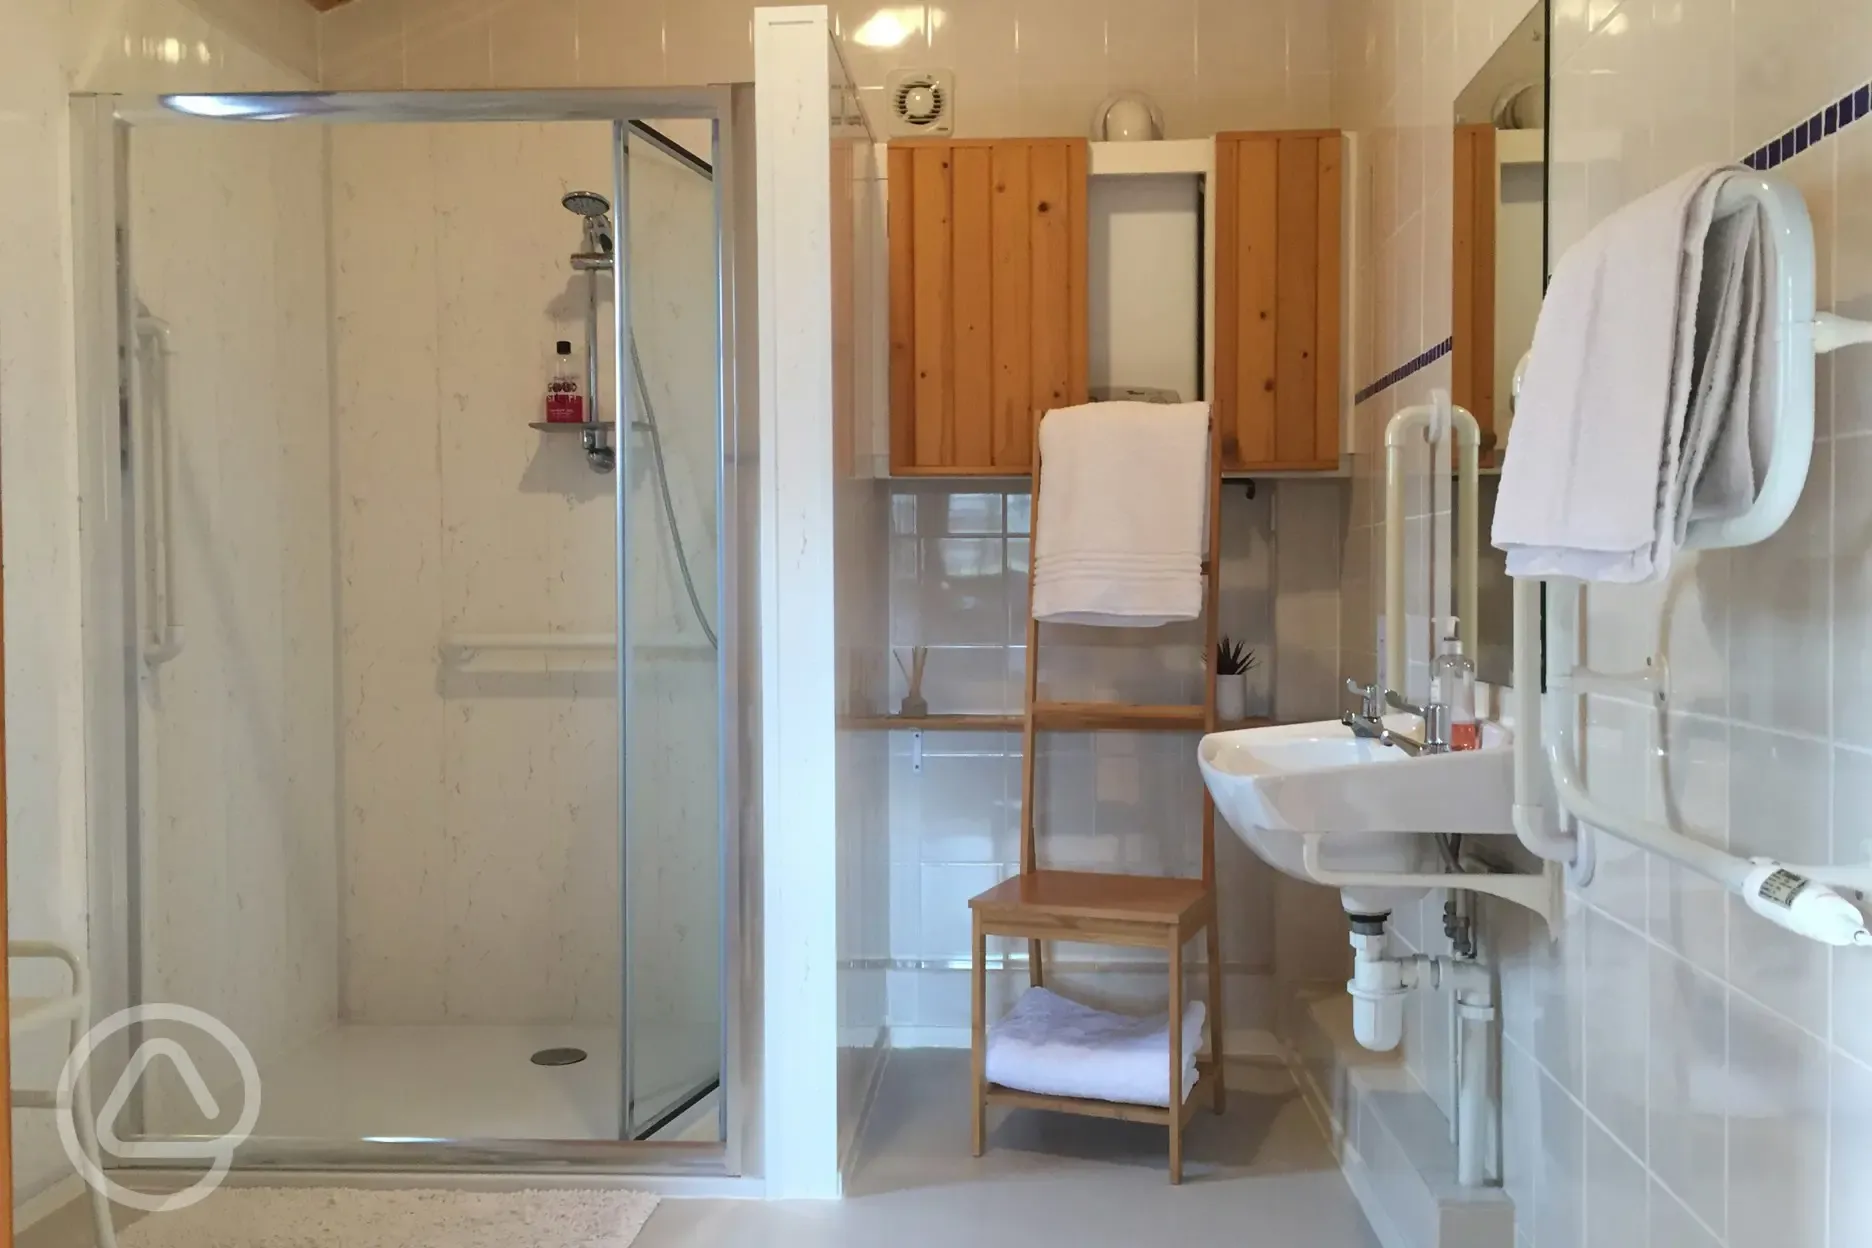 Blackforest Lodge bathroom adapted for wheelchair users